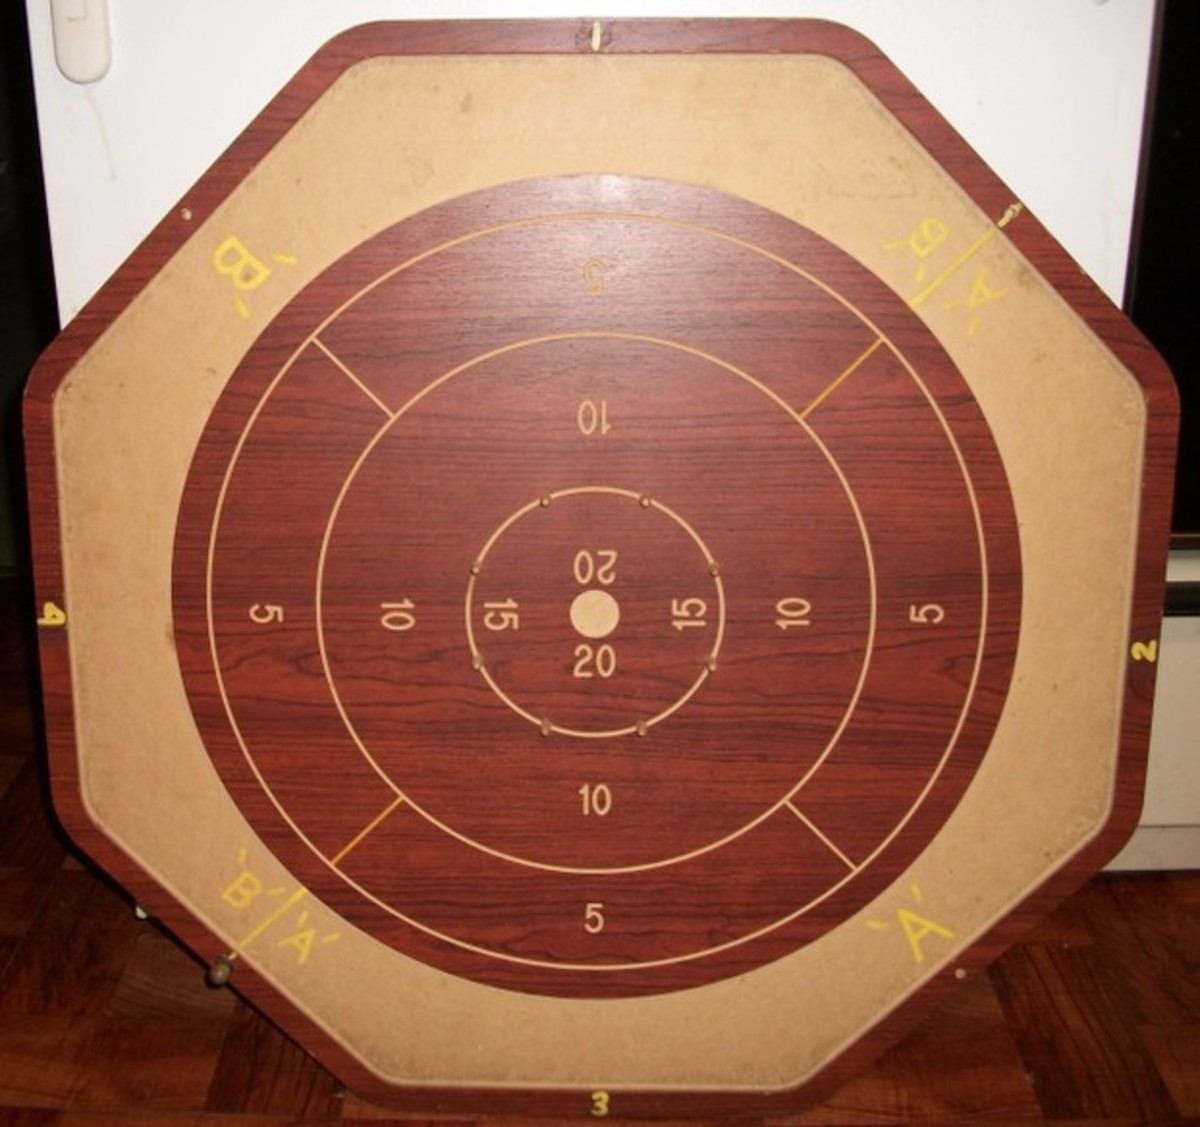 Playing the Game of Crokinole